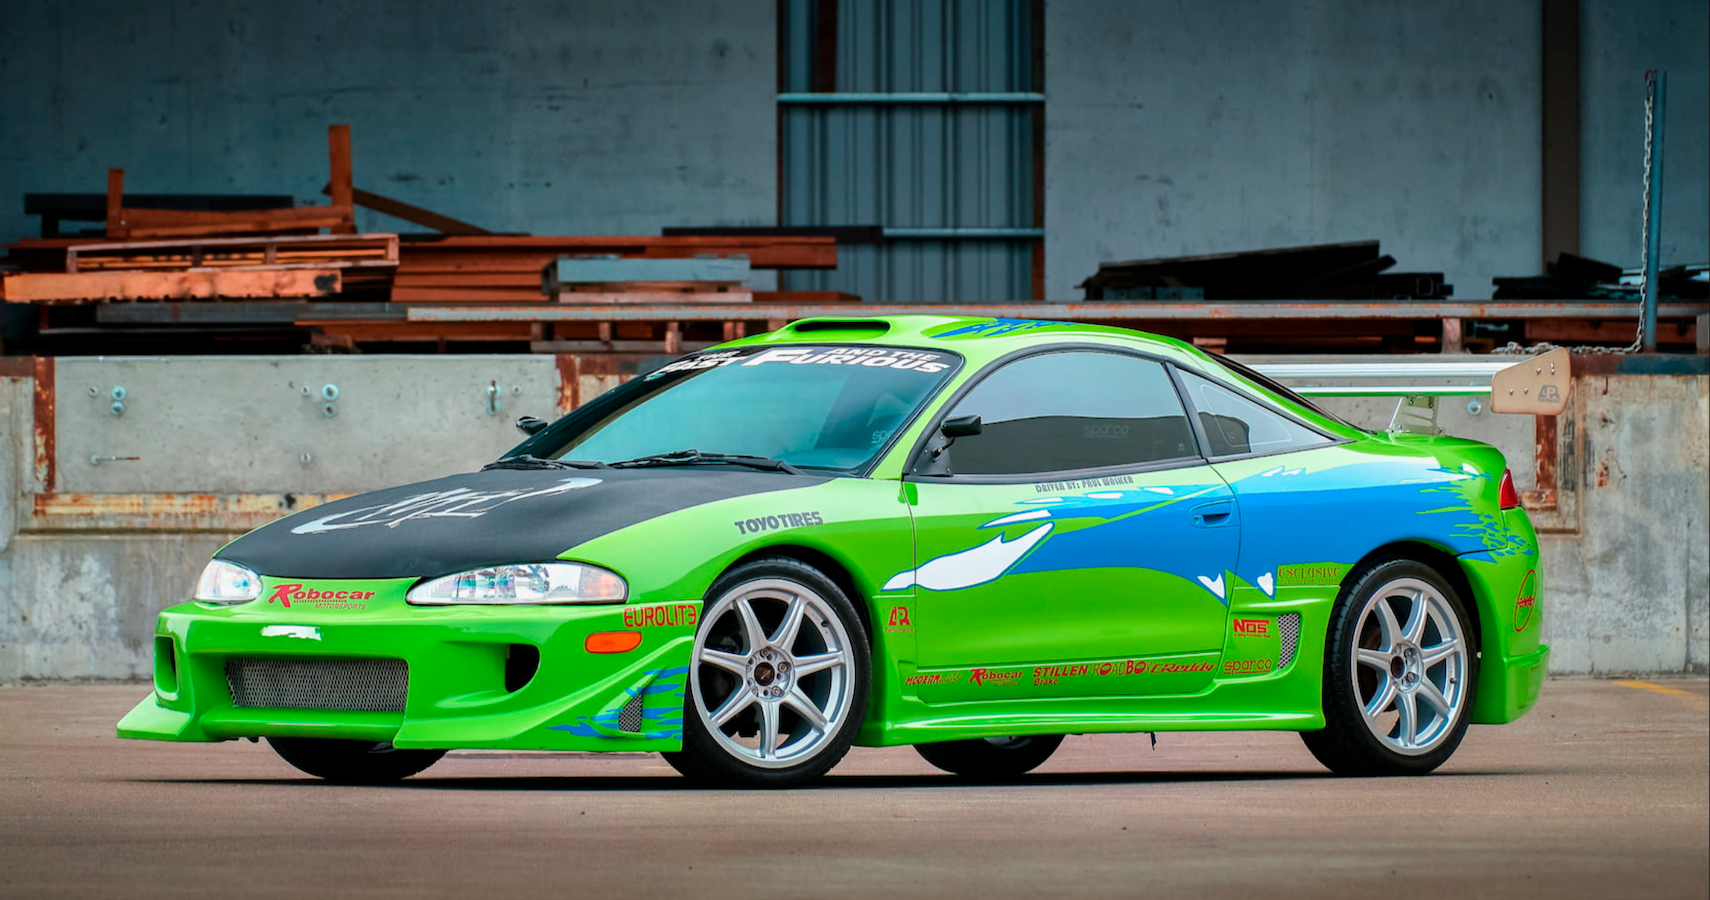 Brian's Mitsubishi Eclipse From The Fast And The Furious